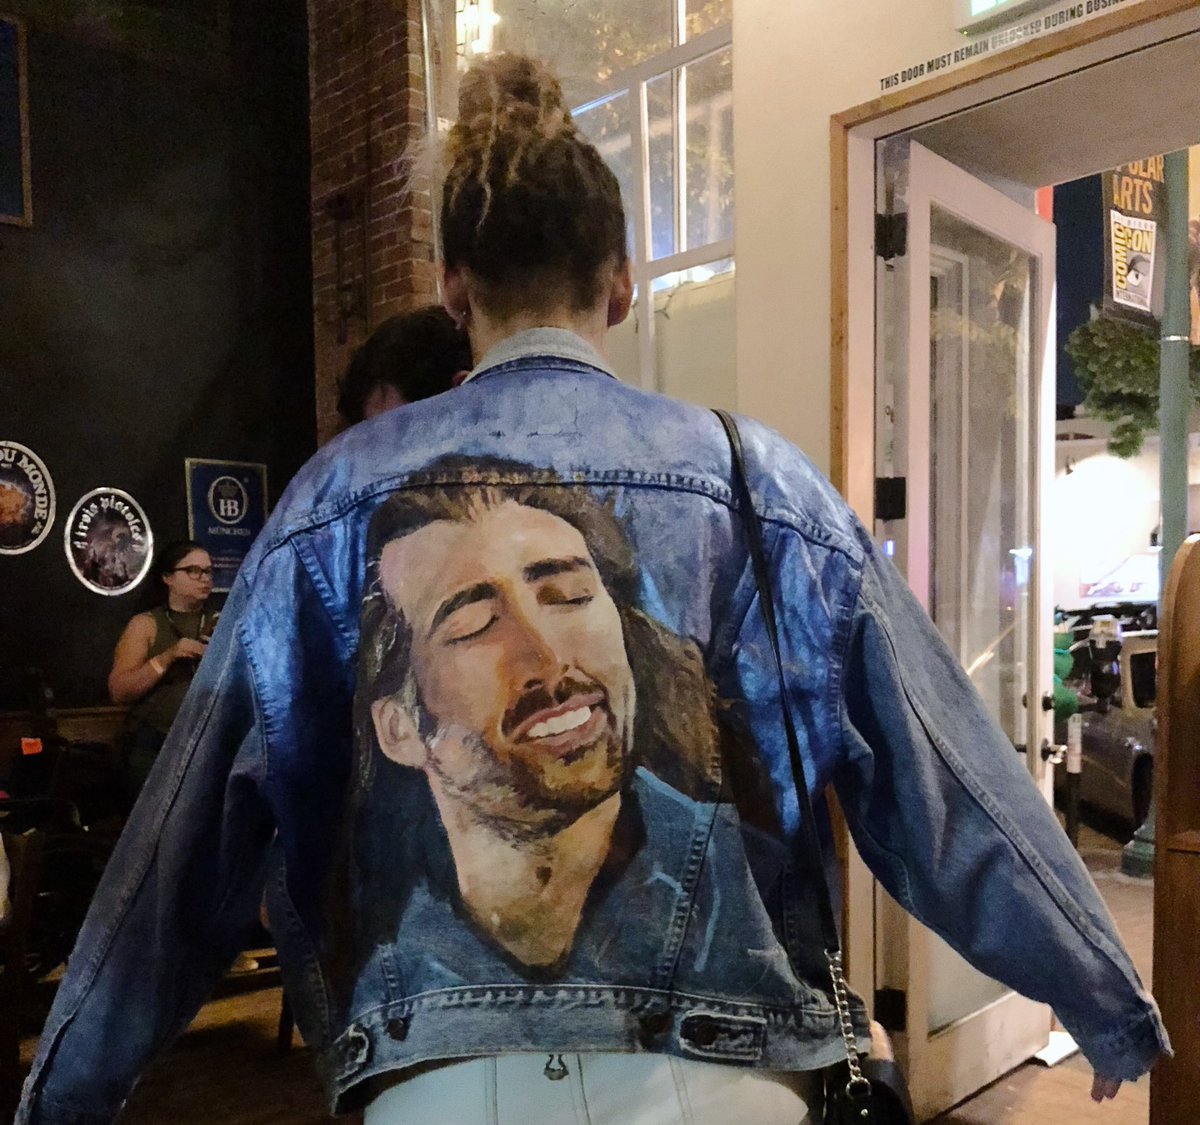 #TrialByContent’s Cage Match reminded me of one of the greatest things I’ve ever experienced at #SDCC. Meeting the person who commissioned this glorious jacket. @jowrotethis @Da7e  @rejects